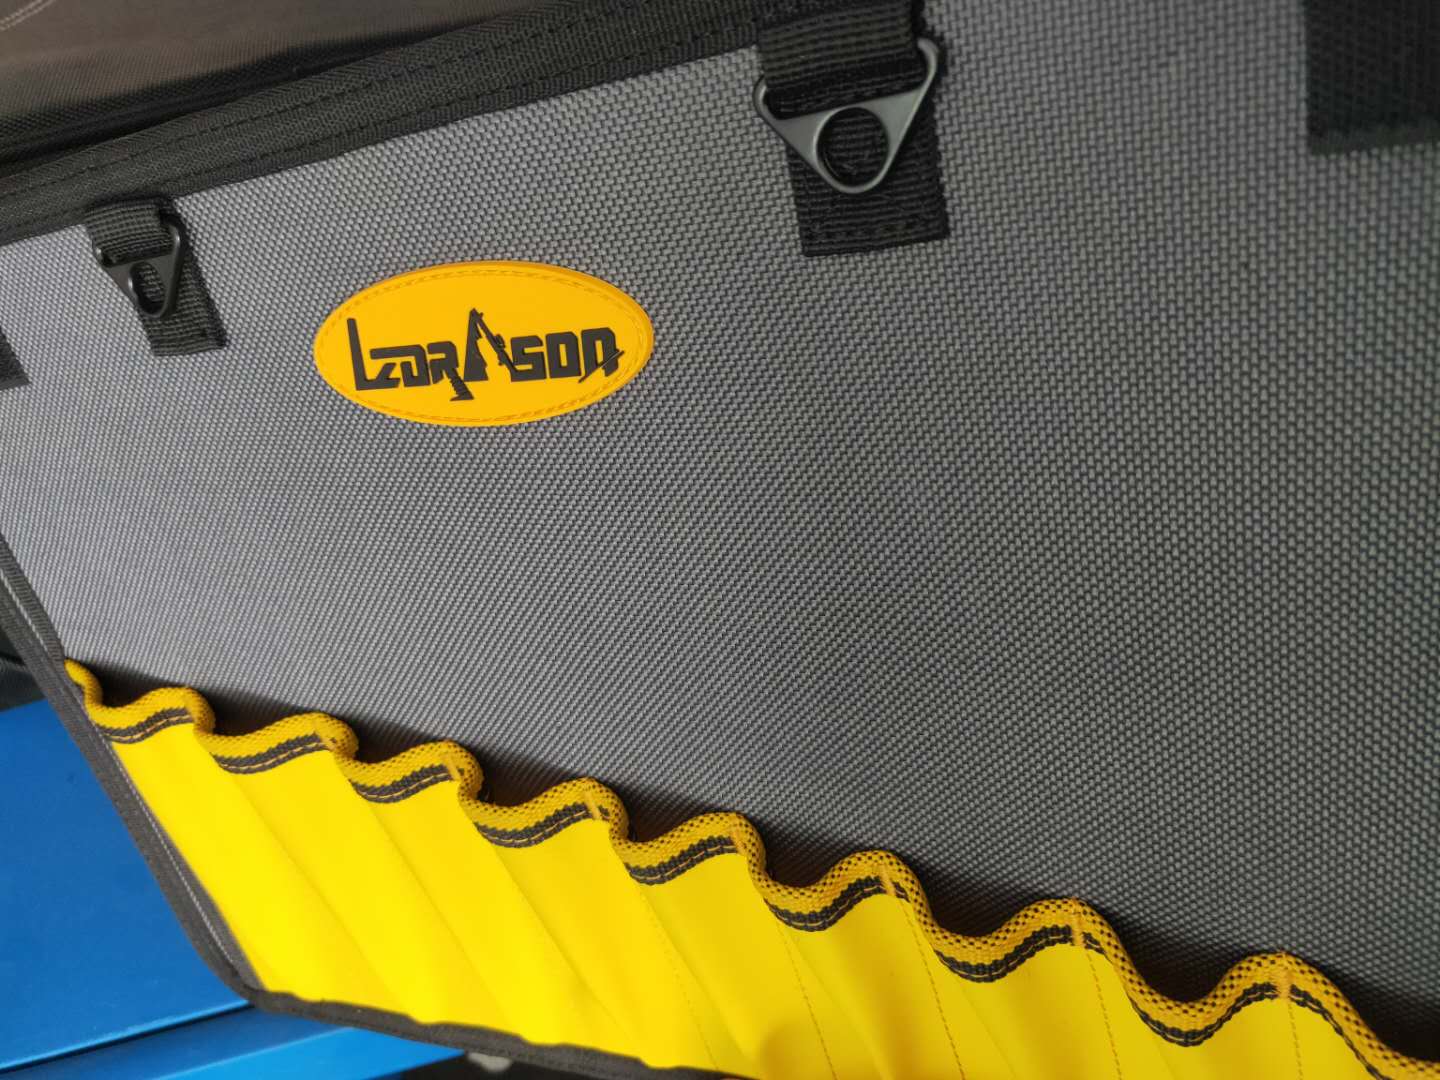 Lzdrason tool tote bag wholesale online shopping for technician-8